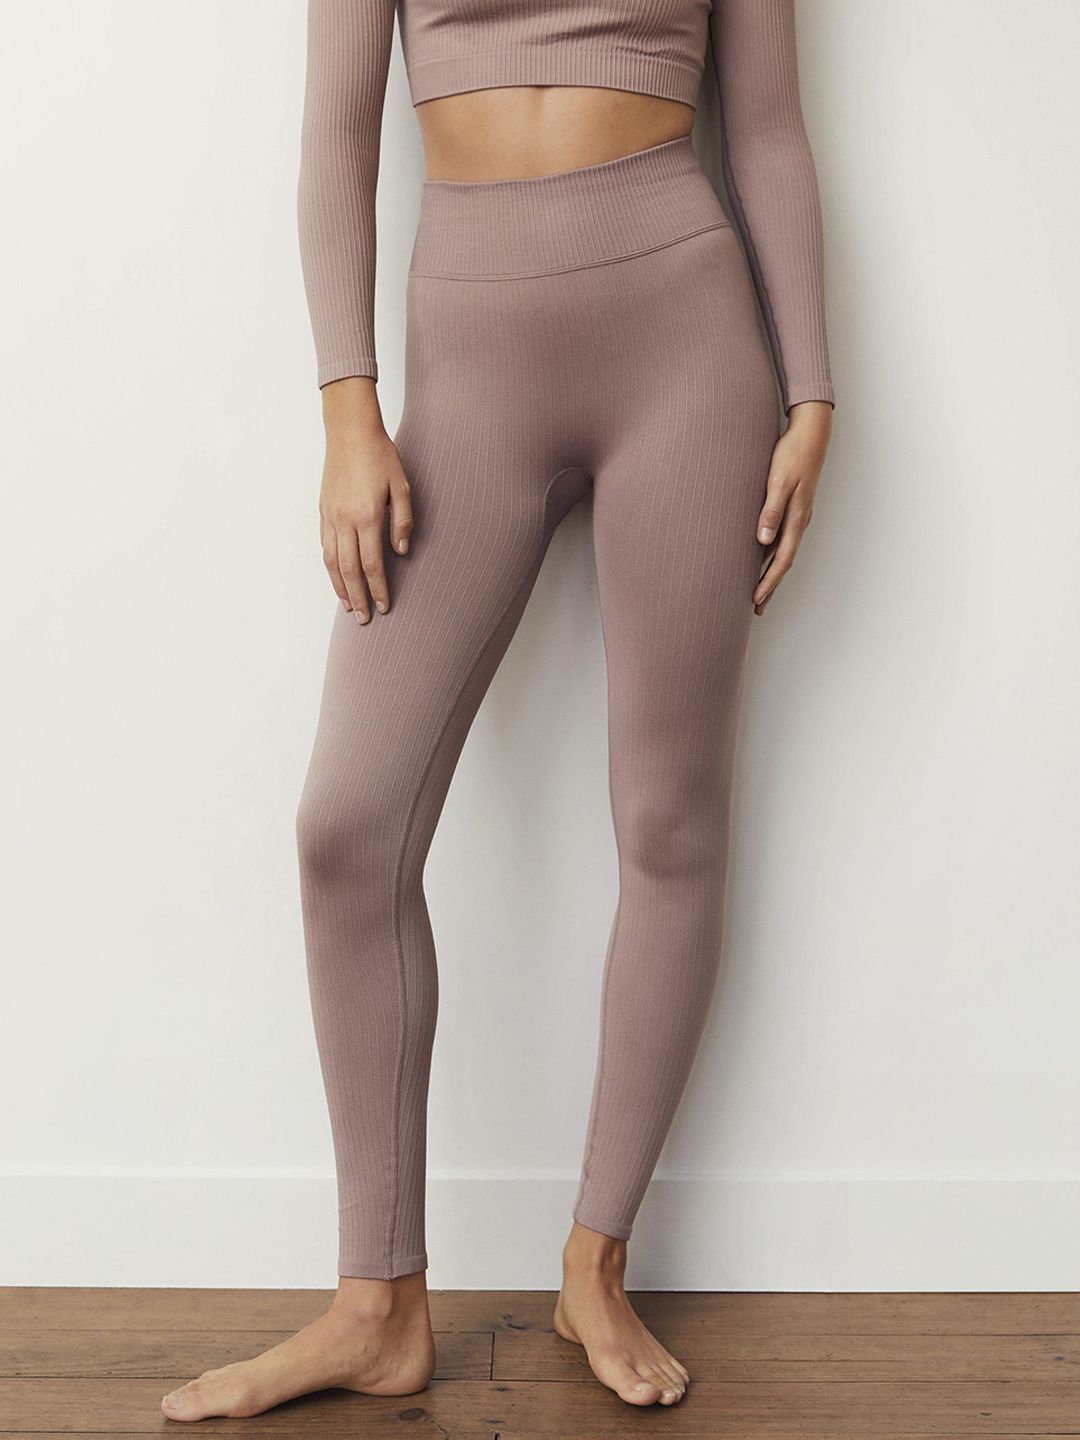 MANGO Women Mauve Self-Striped Ankle Length Tights Price in India